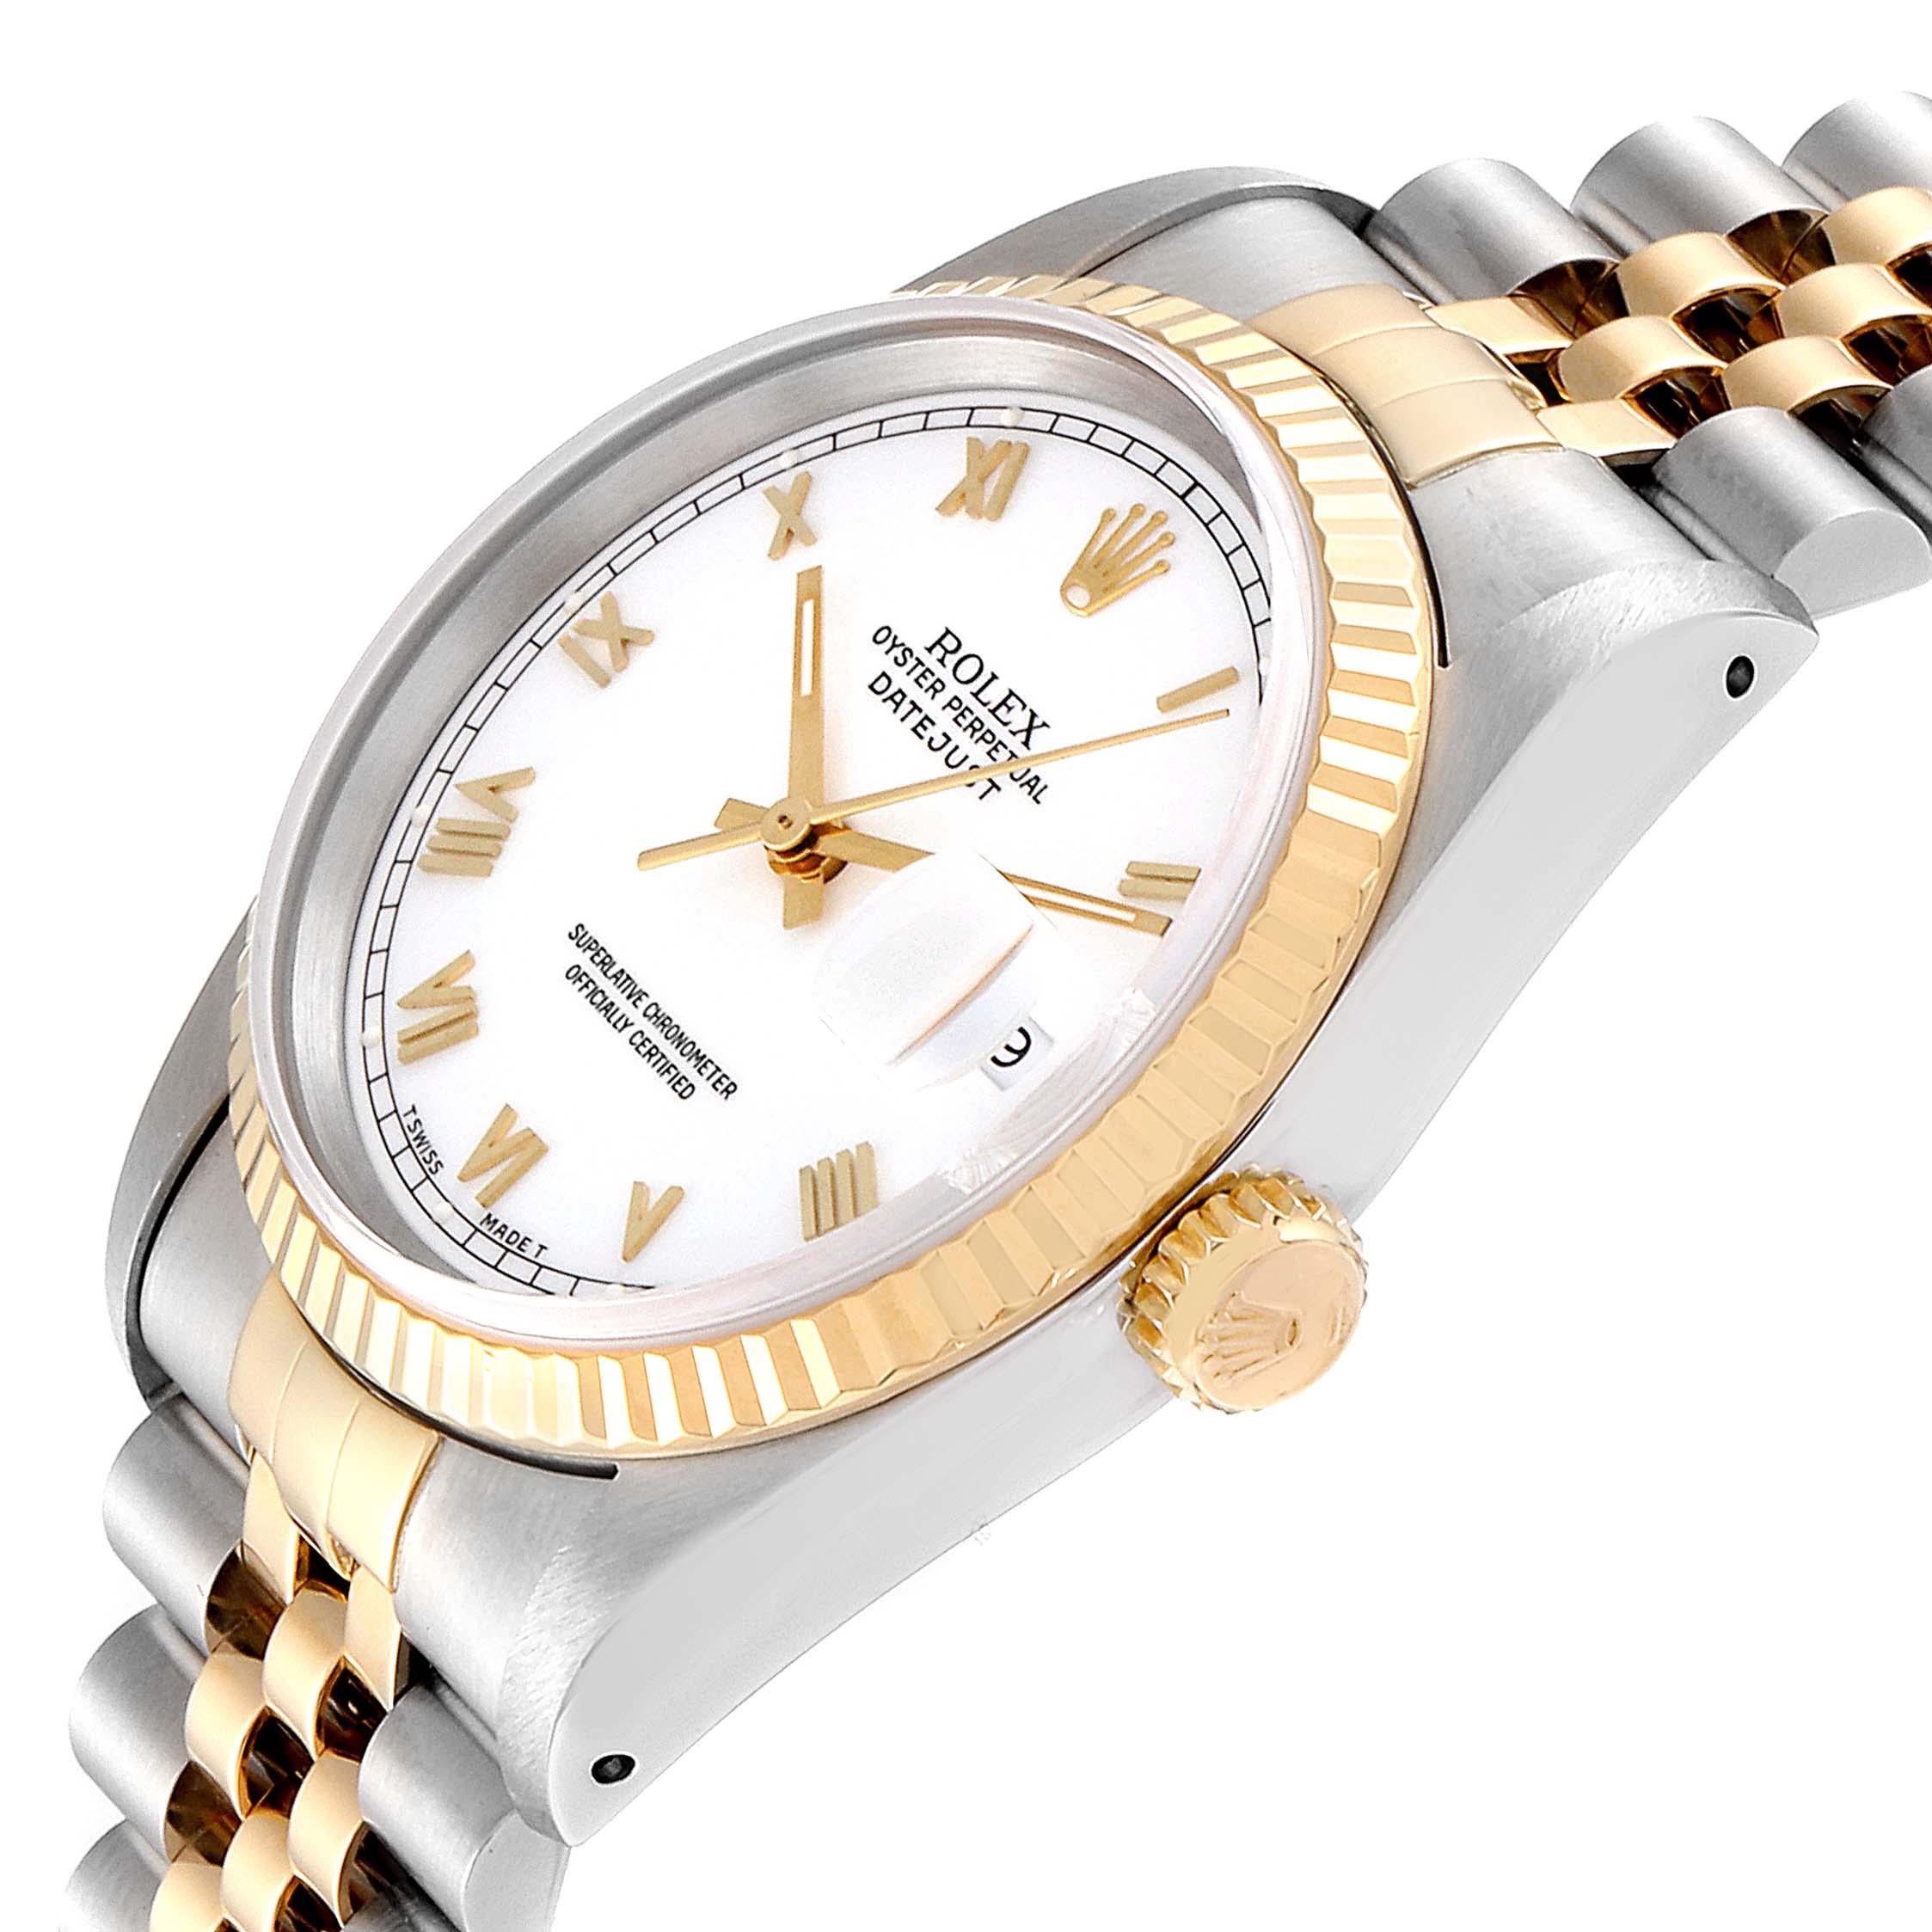 Rolex Datejust Steel Yellow Gold White Roman Dial Men's Watch 16233 Papers 2